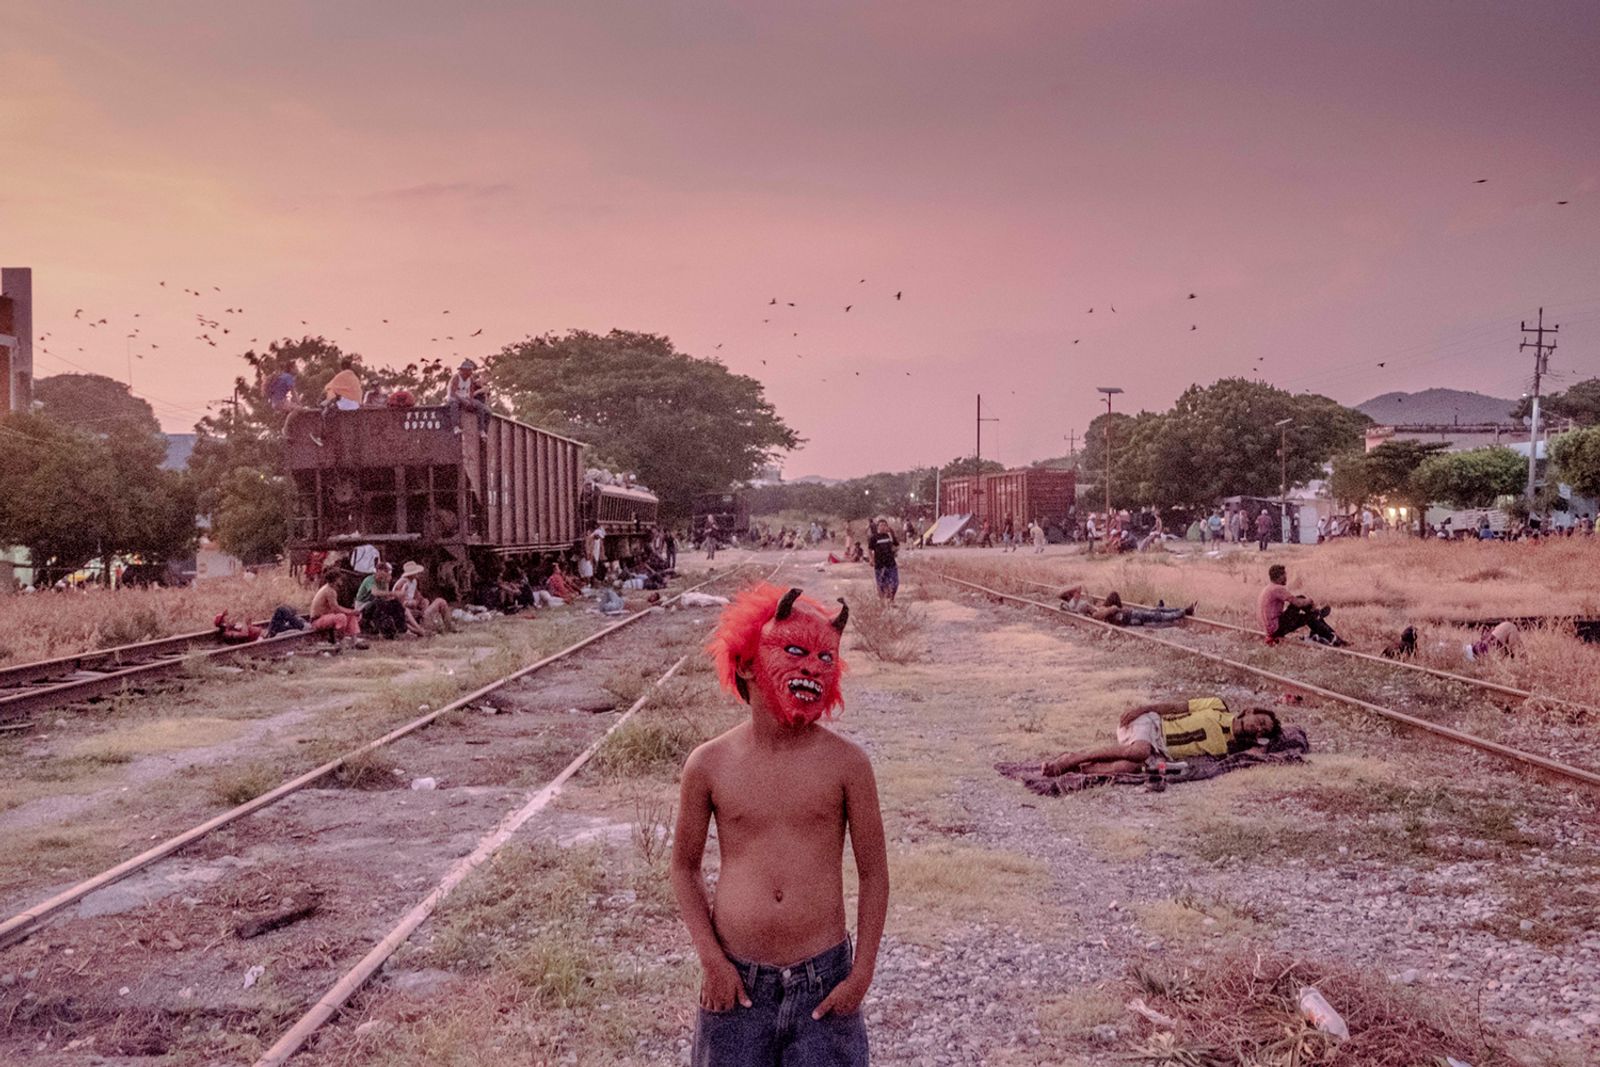 © Fred Ramos - A Honduran child plays near train tracks in Arriaga, Chiapas, in southern Mexico, October 2018. Fred Ramos